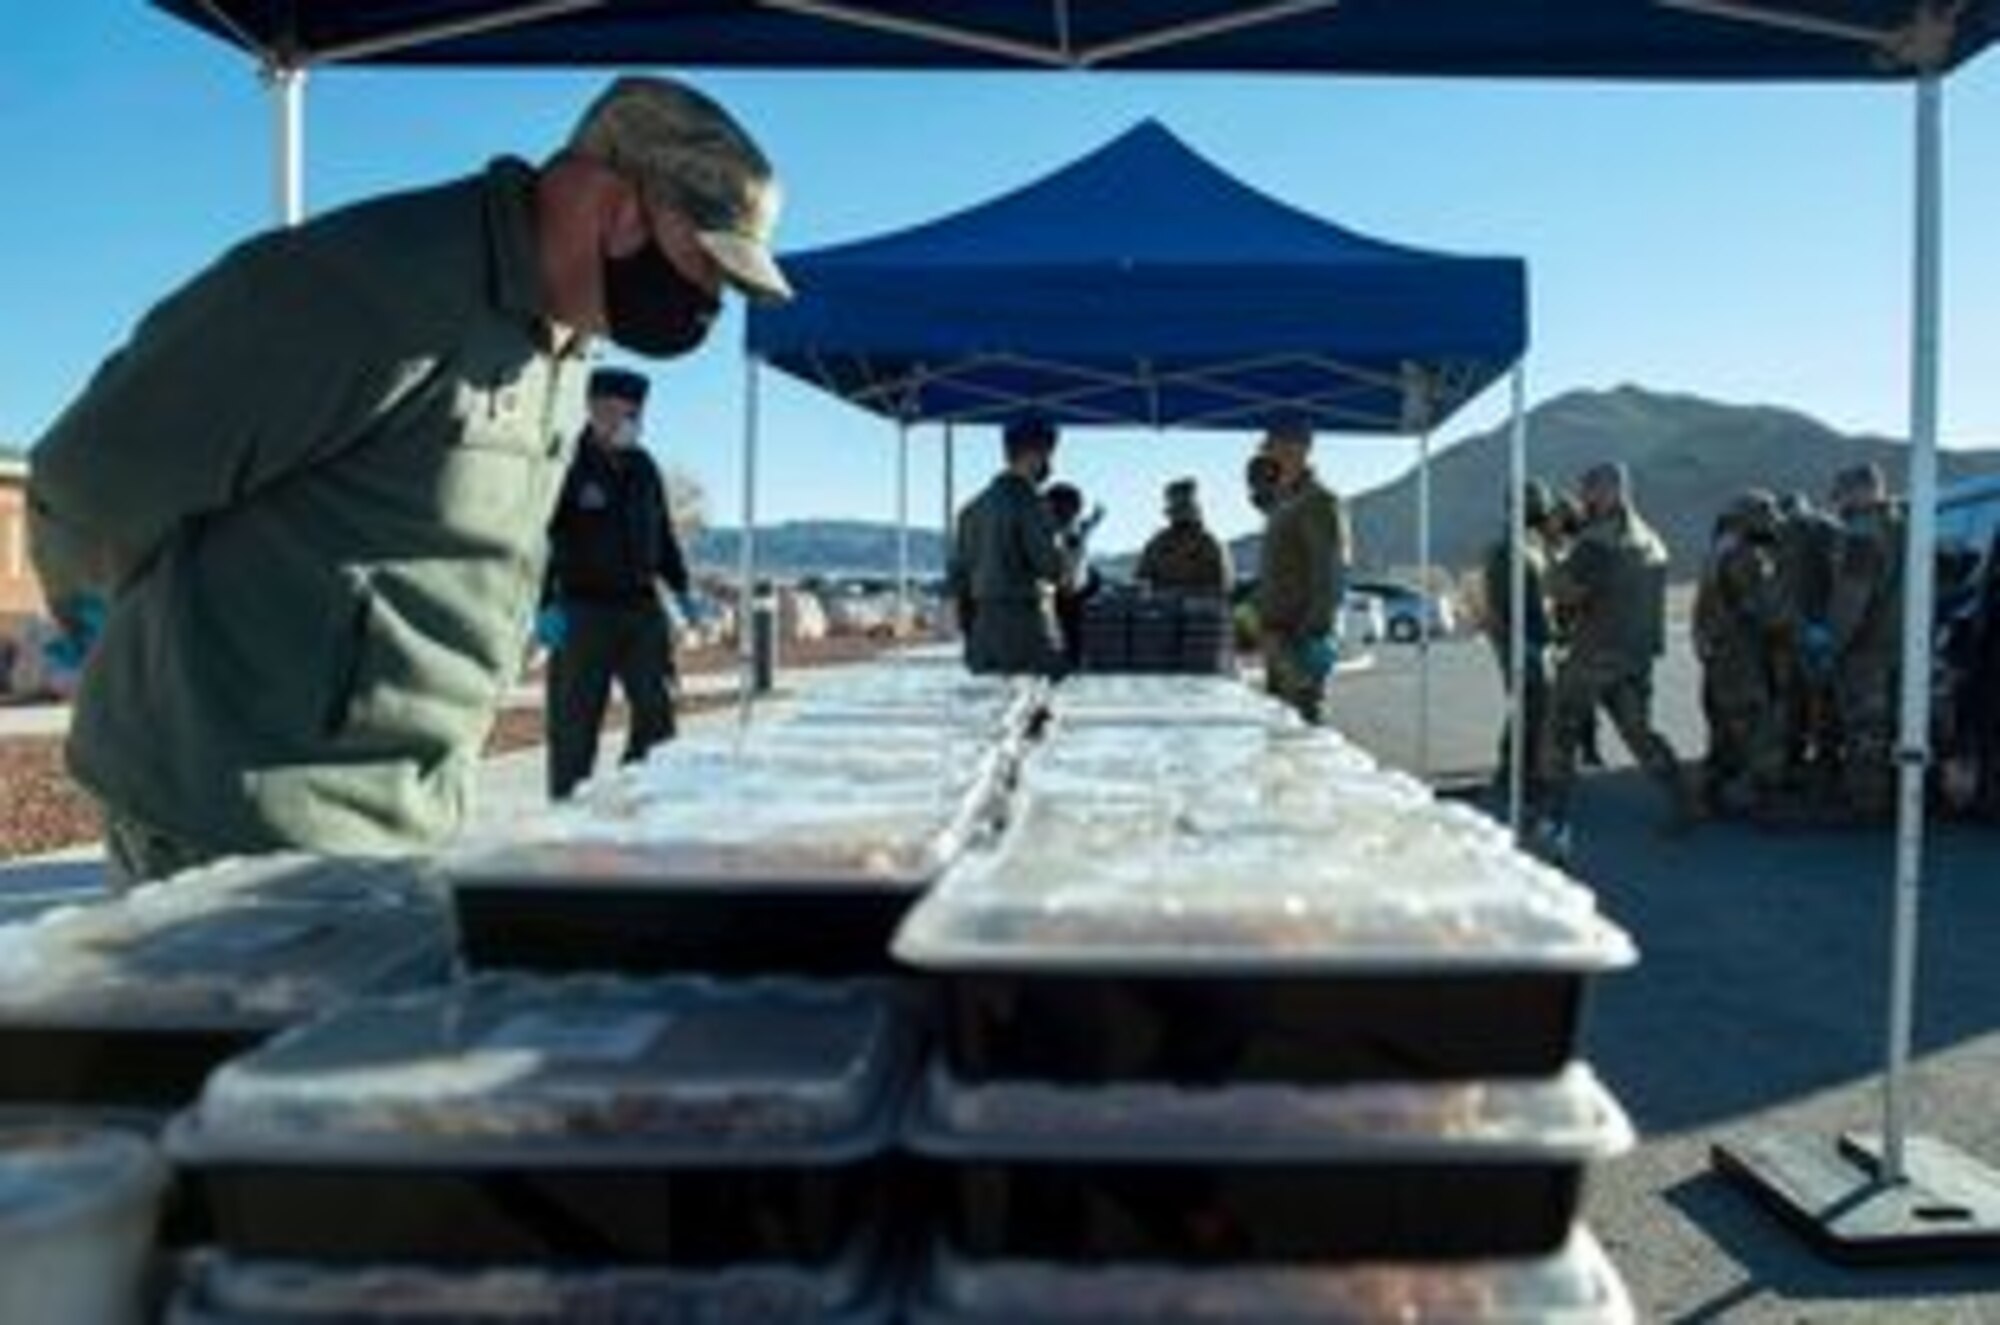 A male military member looks over stacks and rows of box meals in preparation for distribution.